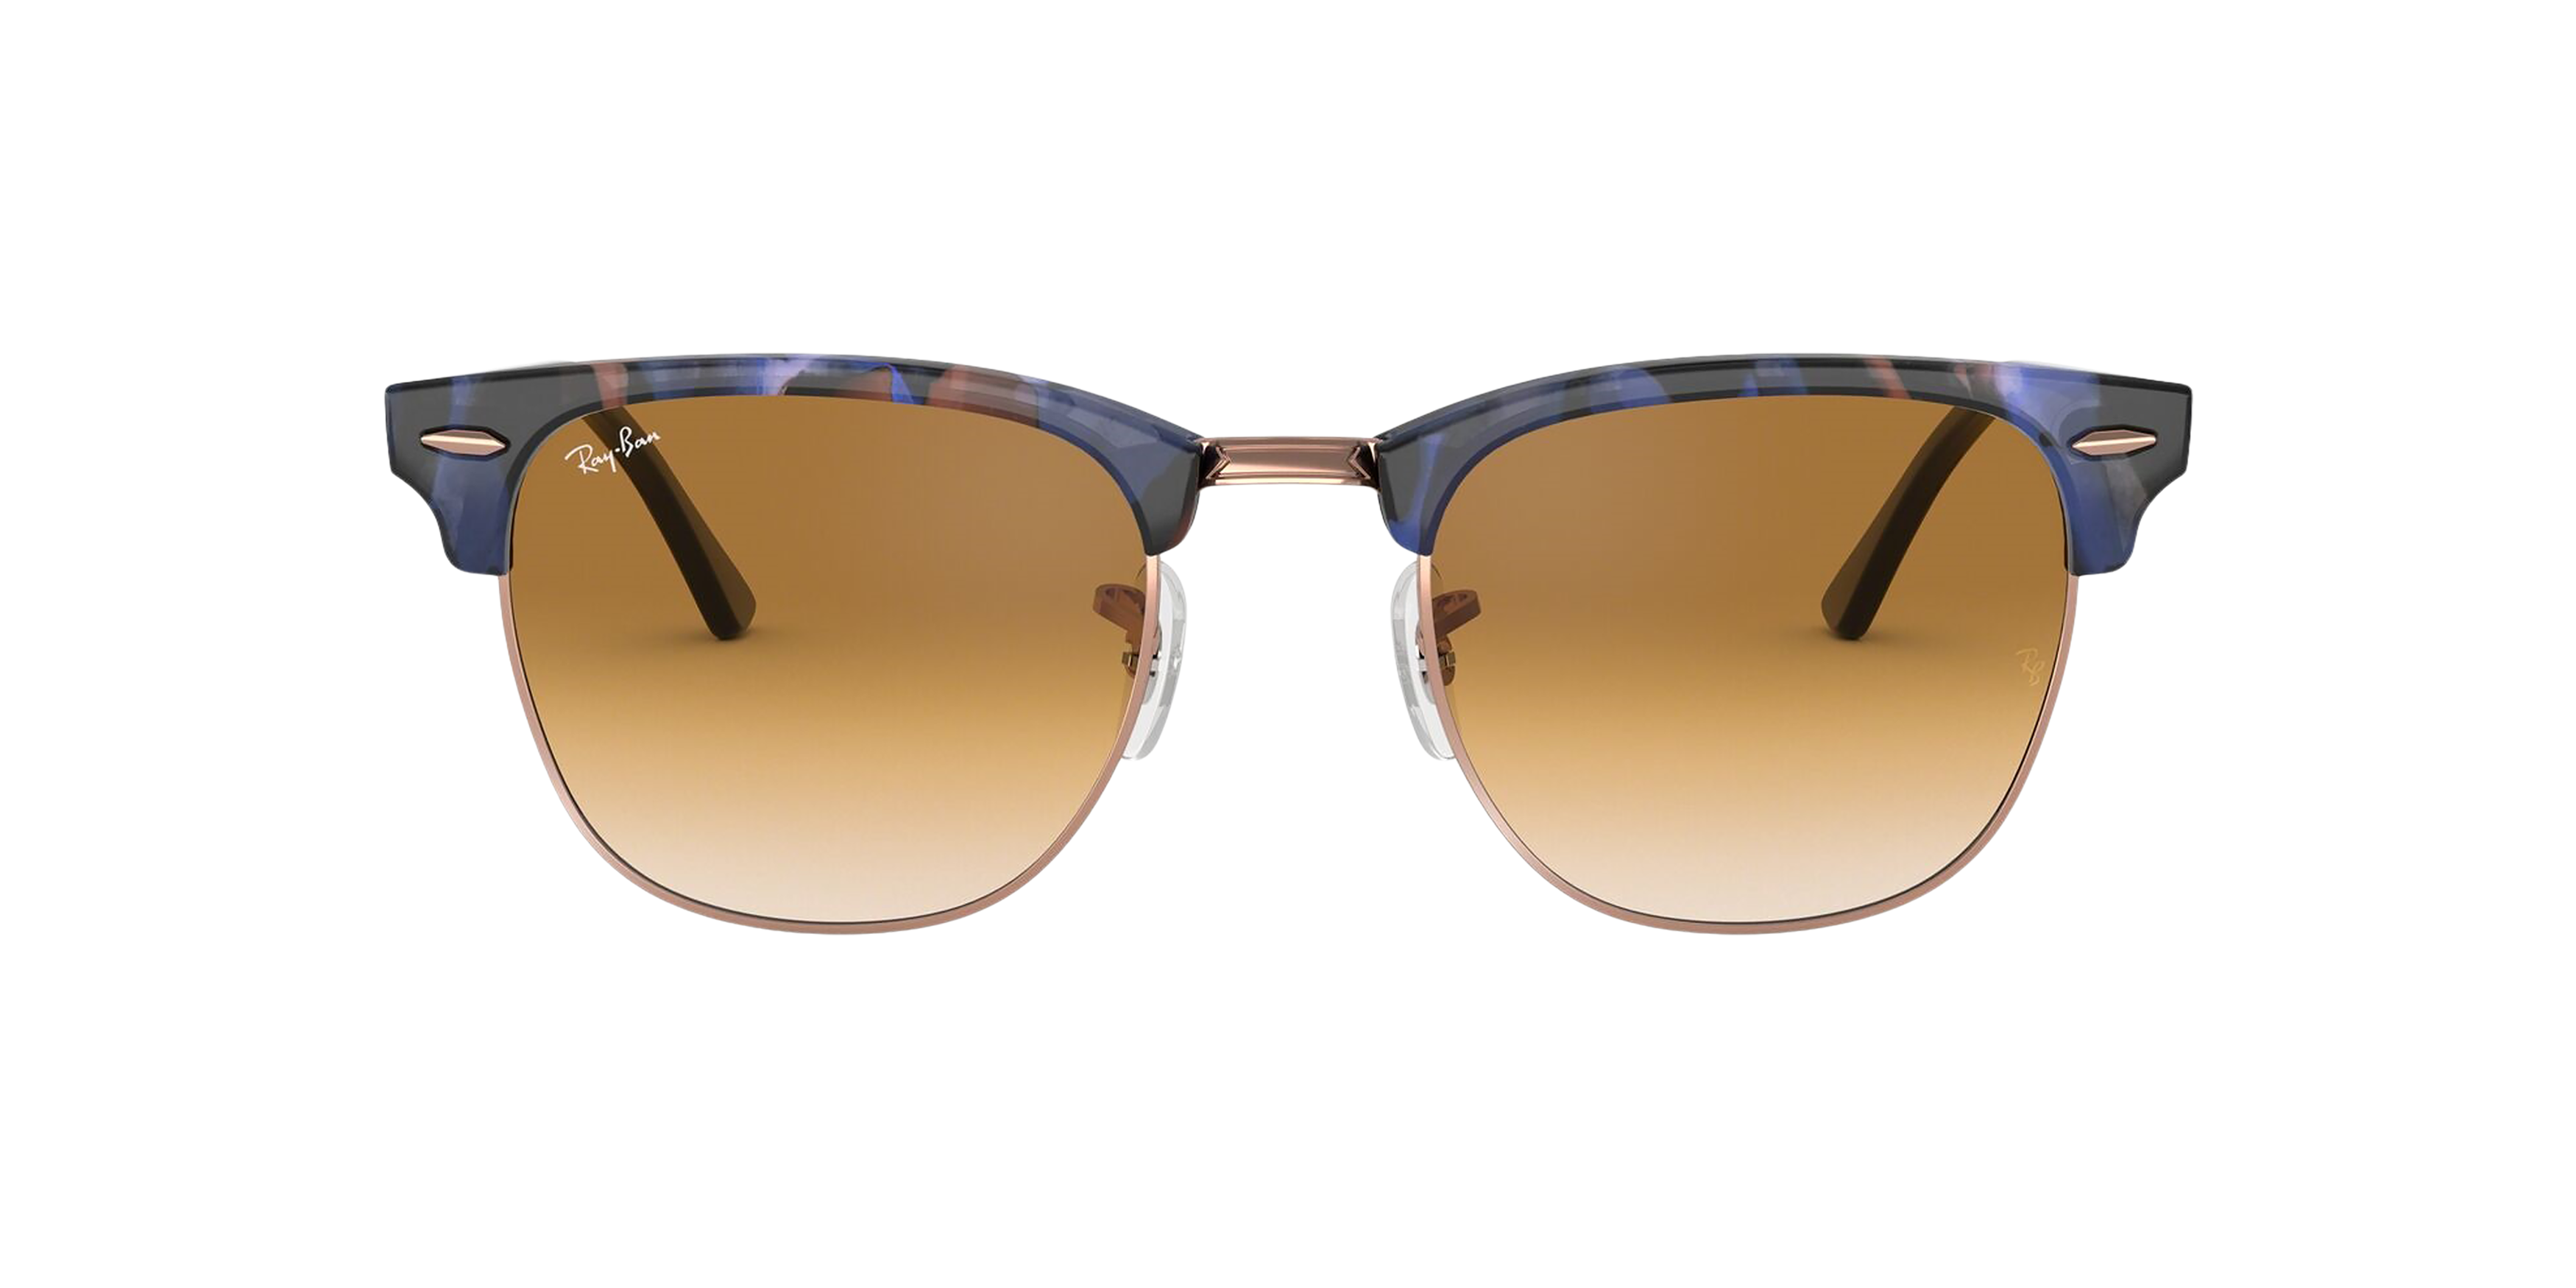 [products.image.front] Ray-Ban Clubmaster Fleck RB3016 125651